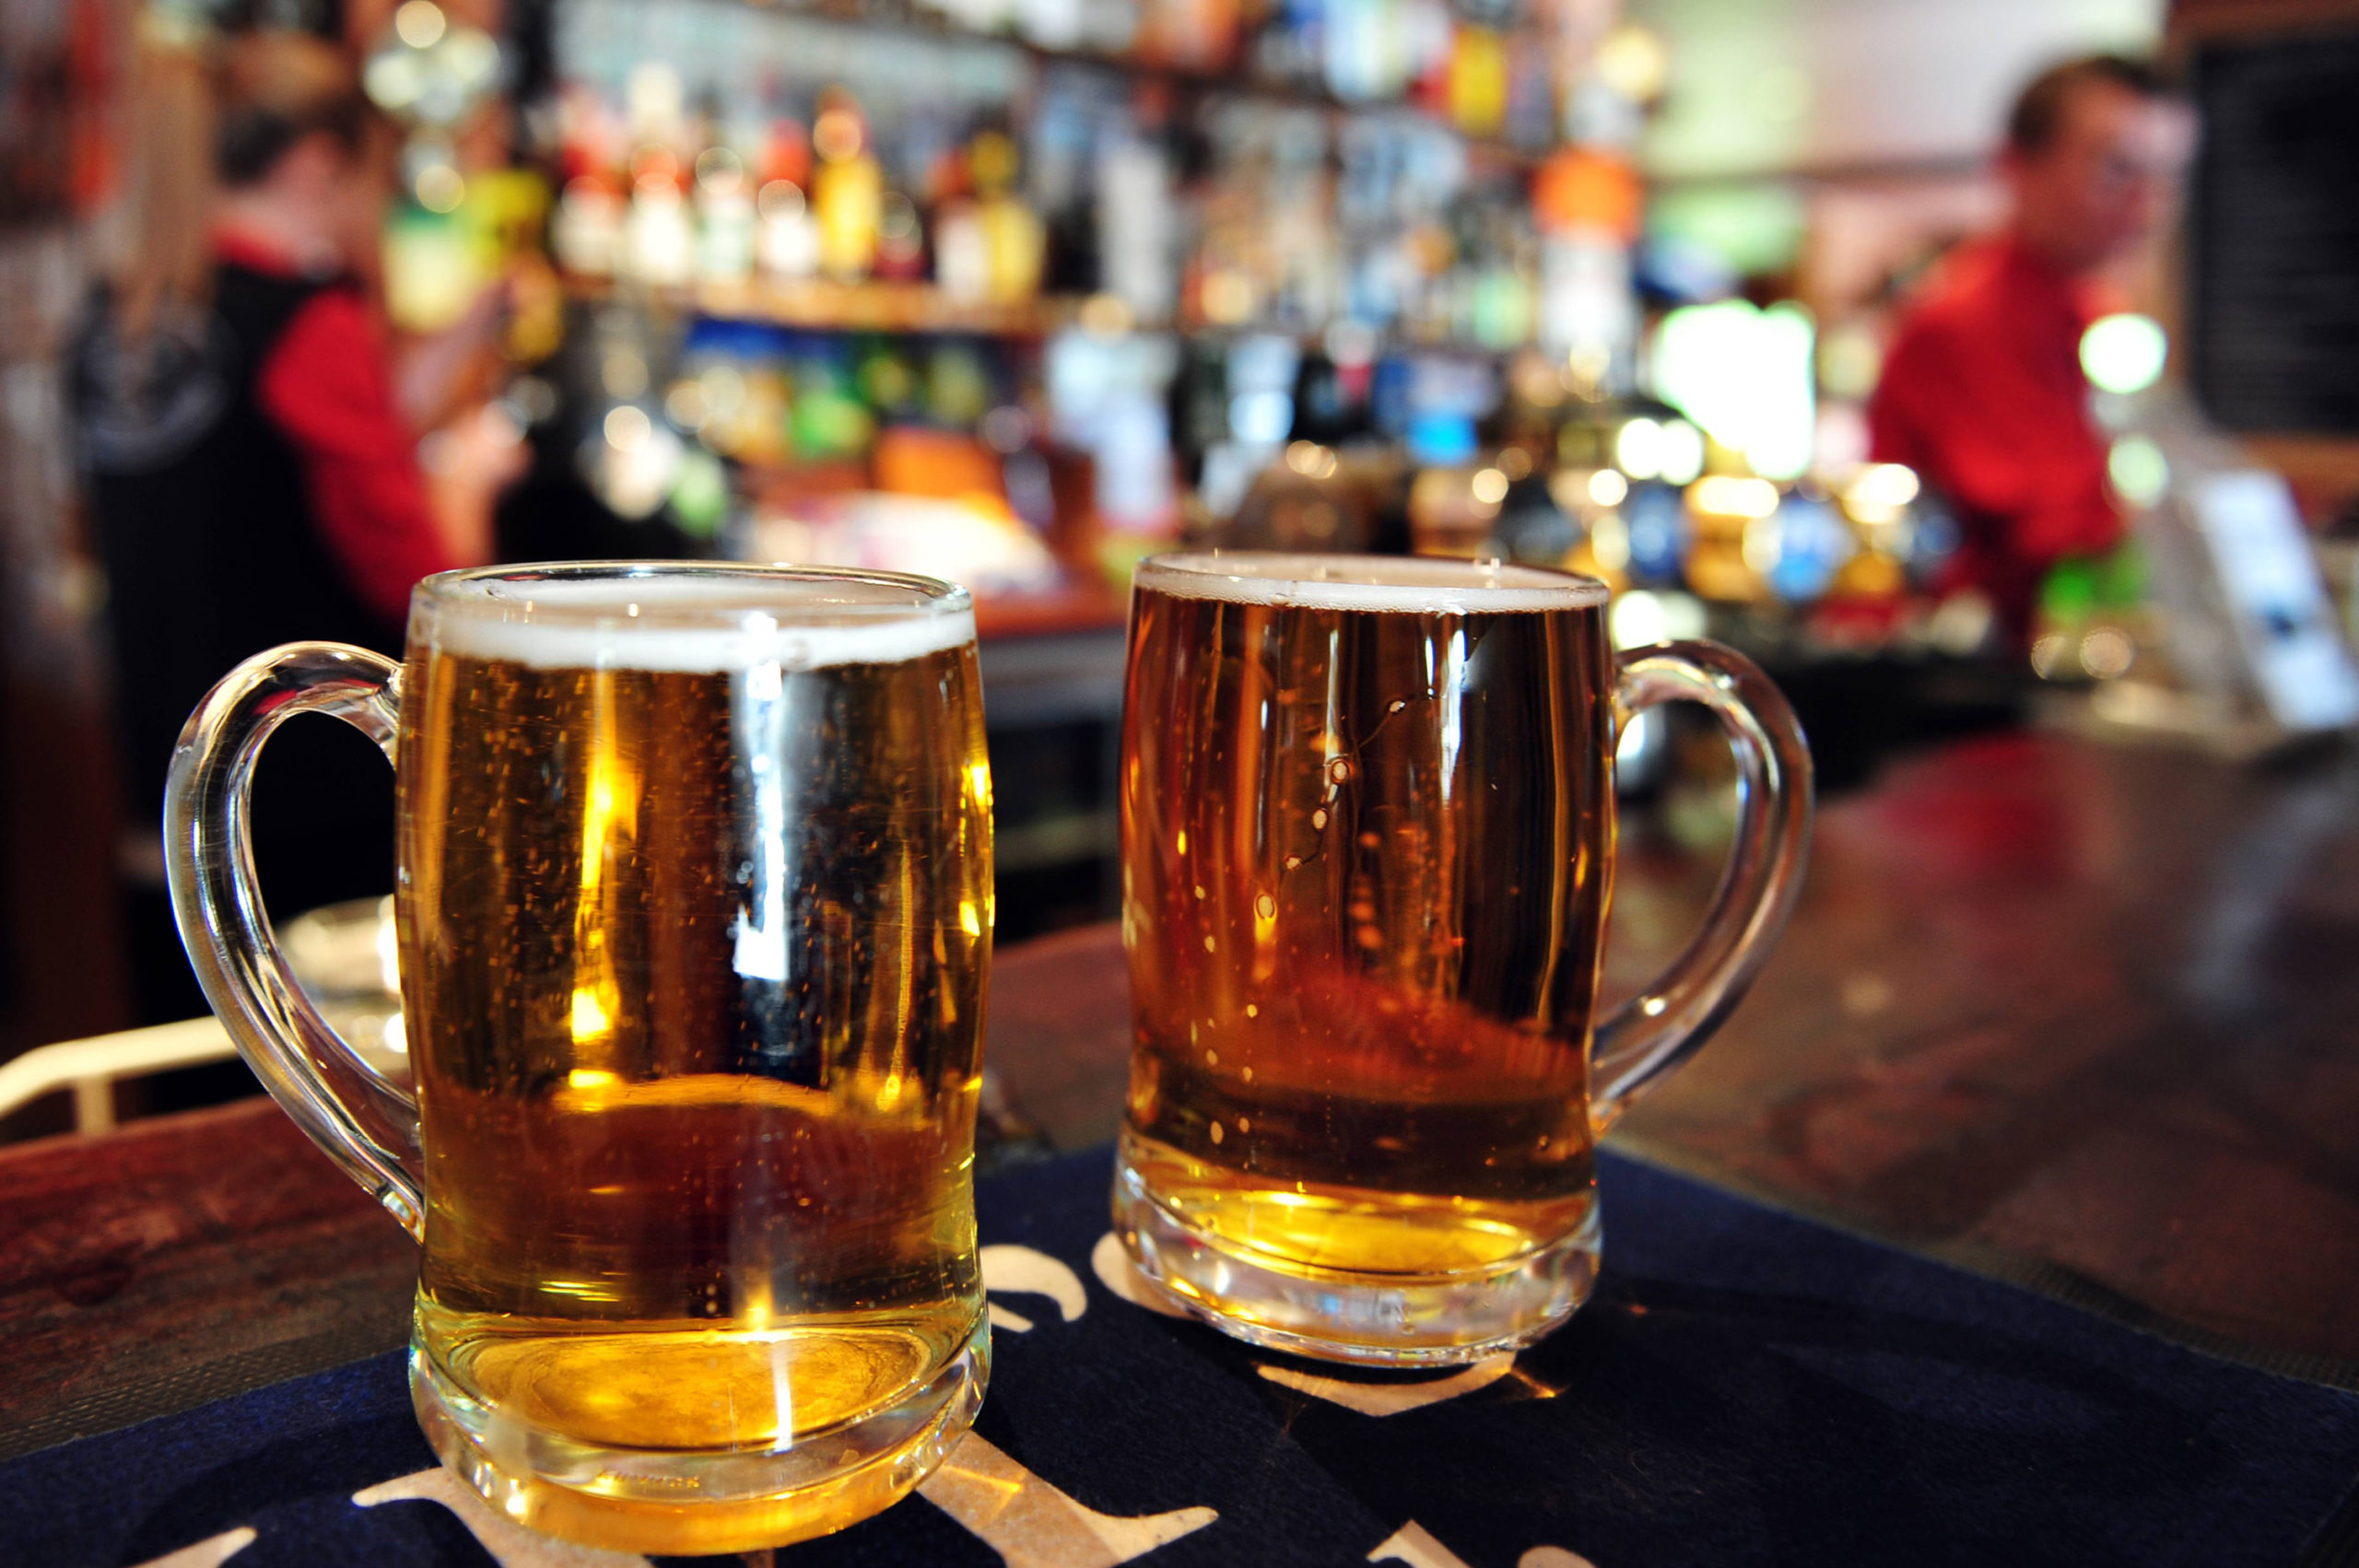 Shortage of Beer and other Alcoholic Beverages Hits Koforidua